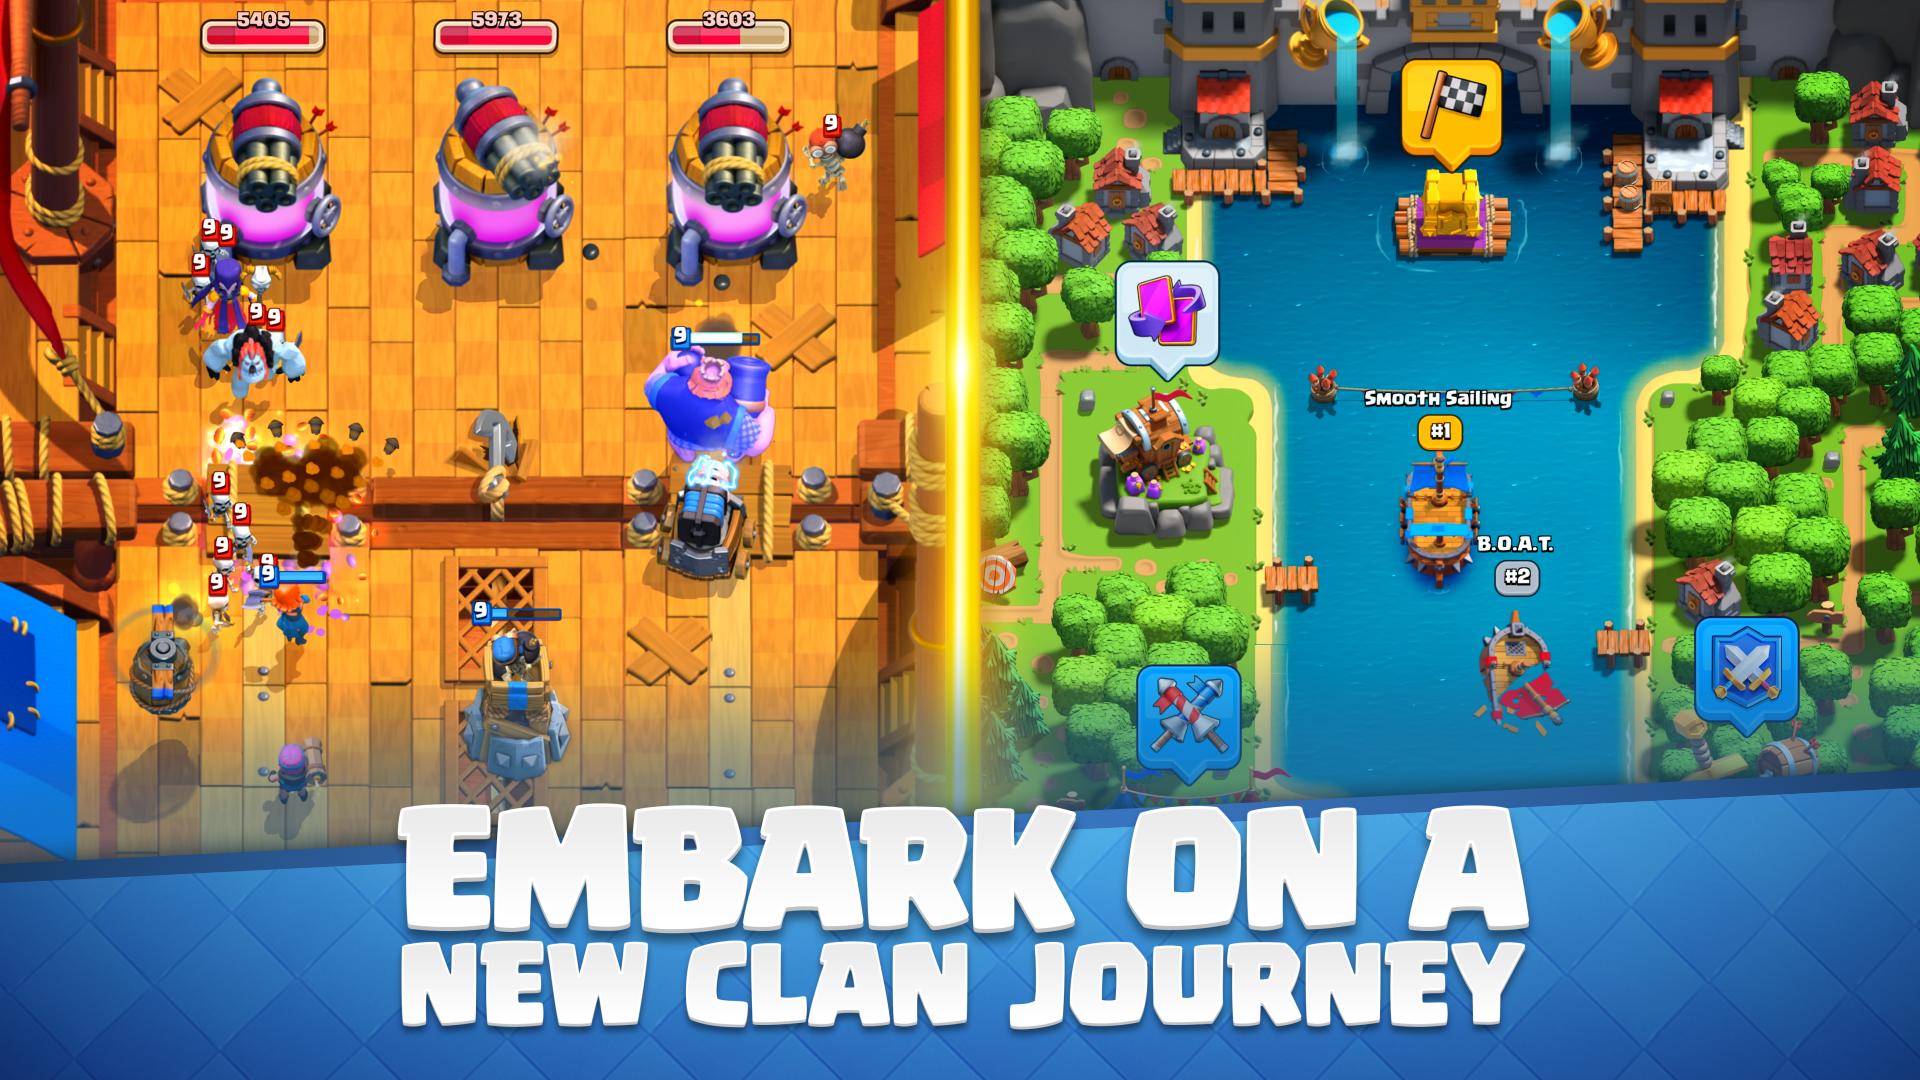 Clash Royale Real Time Strategy Card Game From Supercell Apk 3 3 2 Download And Update In Apkpure App - roblox studio download apk pure